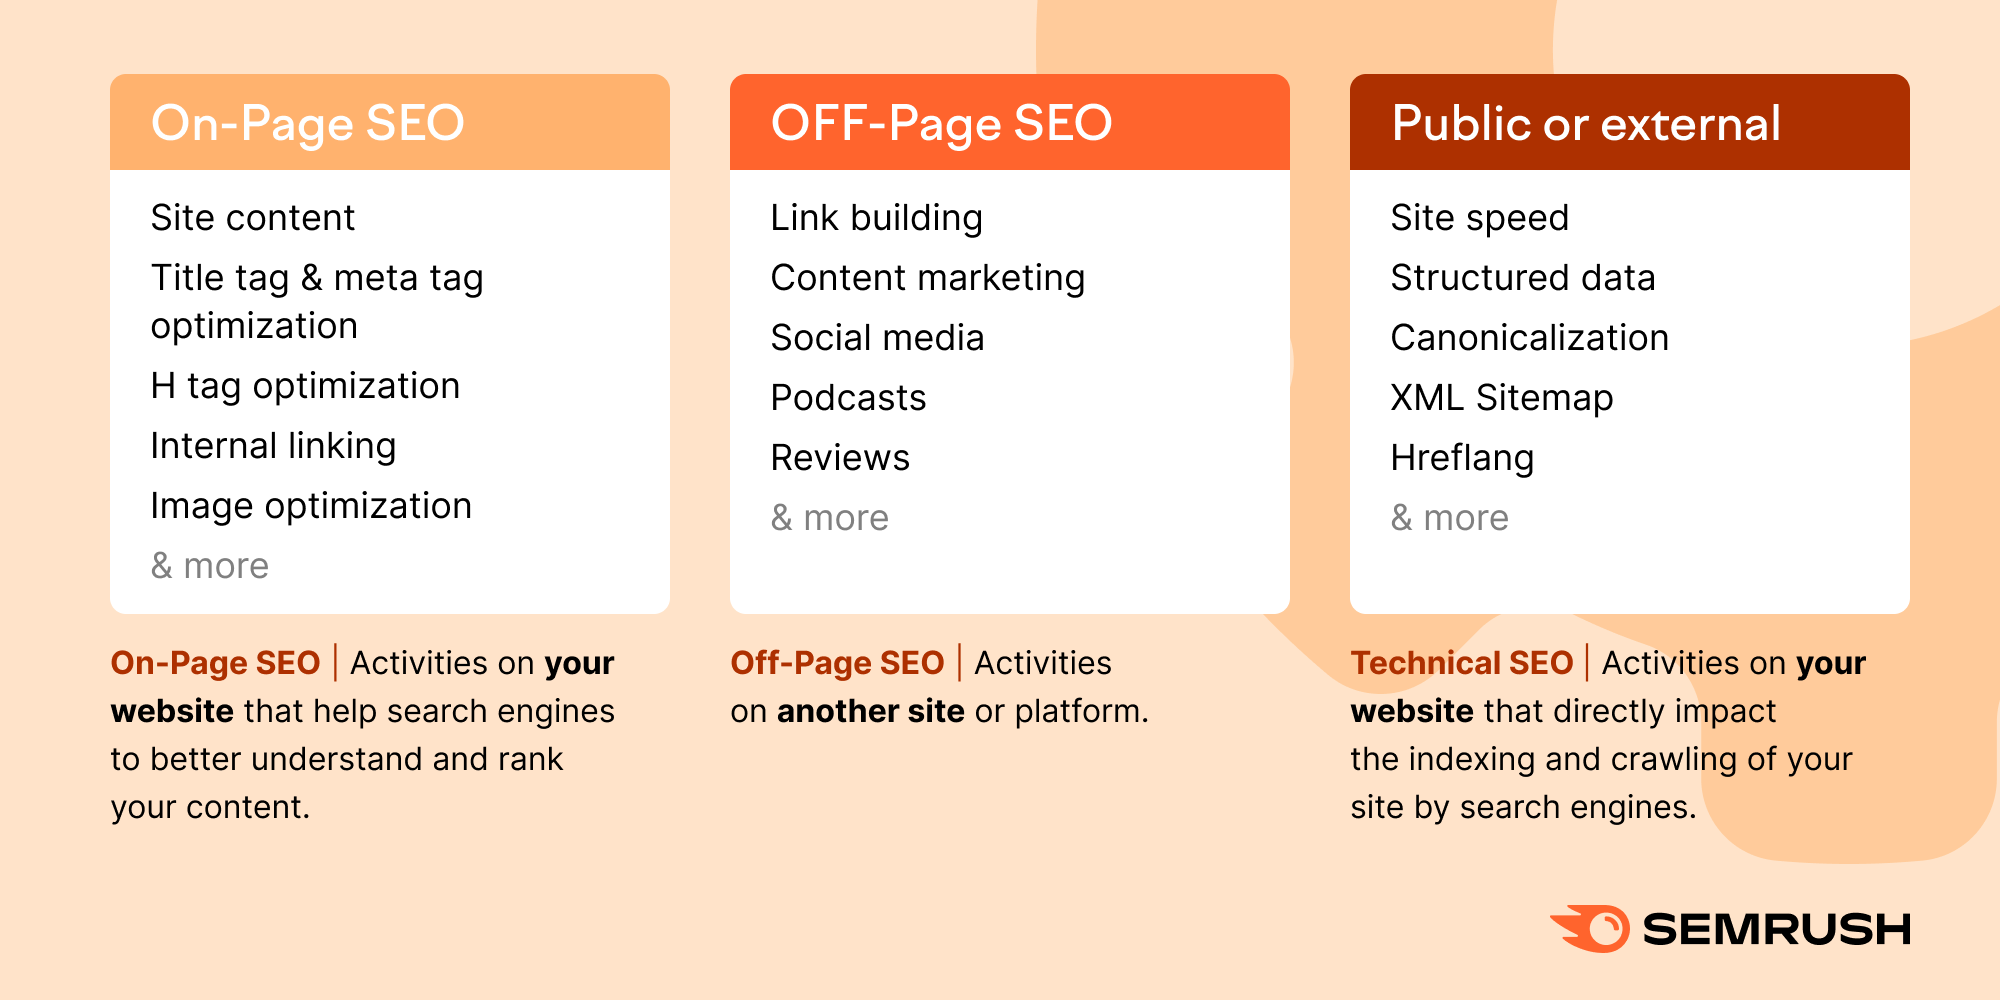 Main Differences Between On-page & Off-page SEO